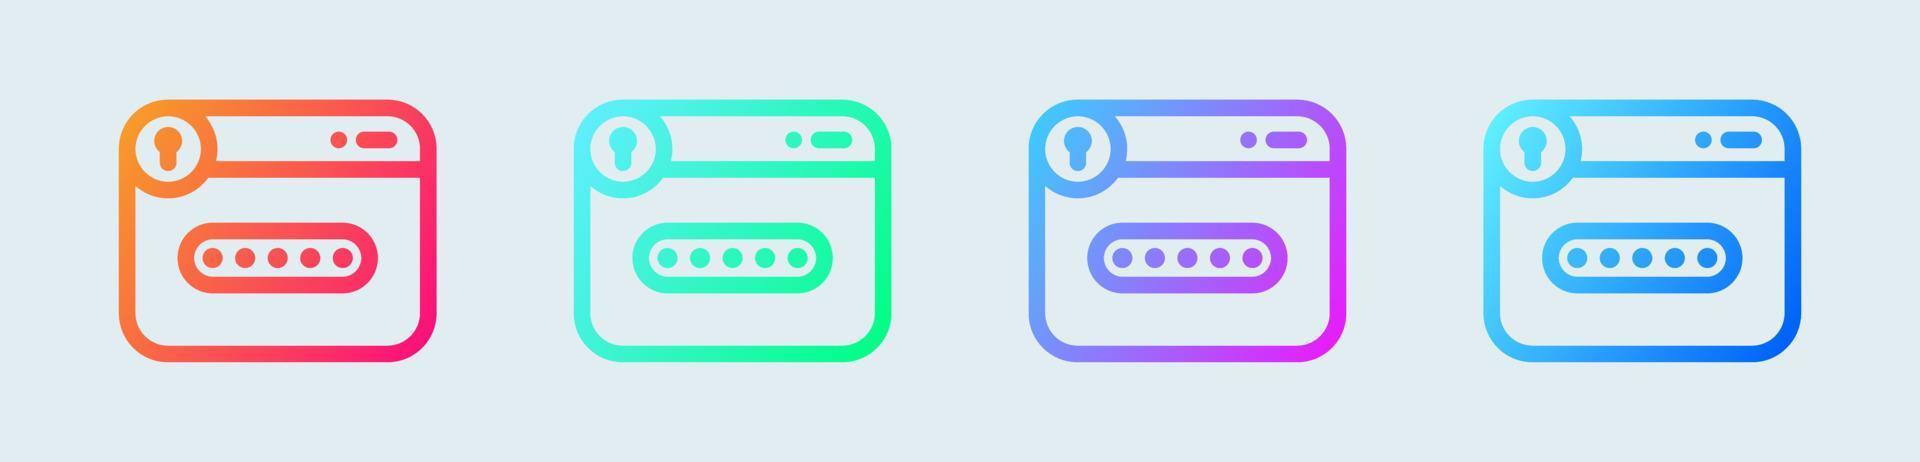 Password line icon in gradient colors. Web protection signs vector illustration.